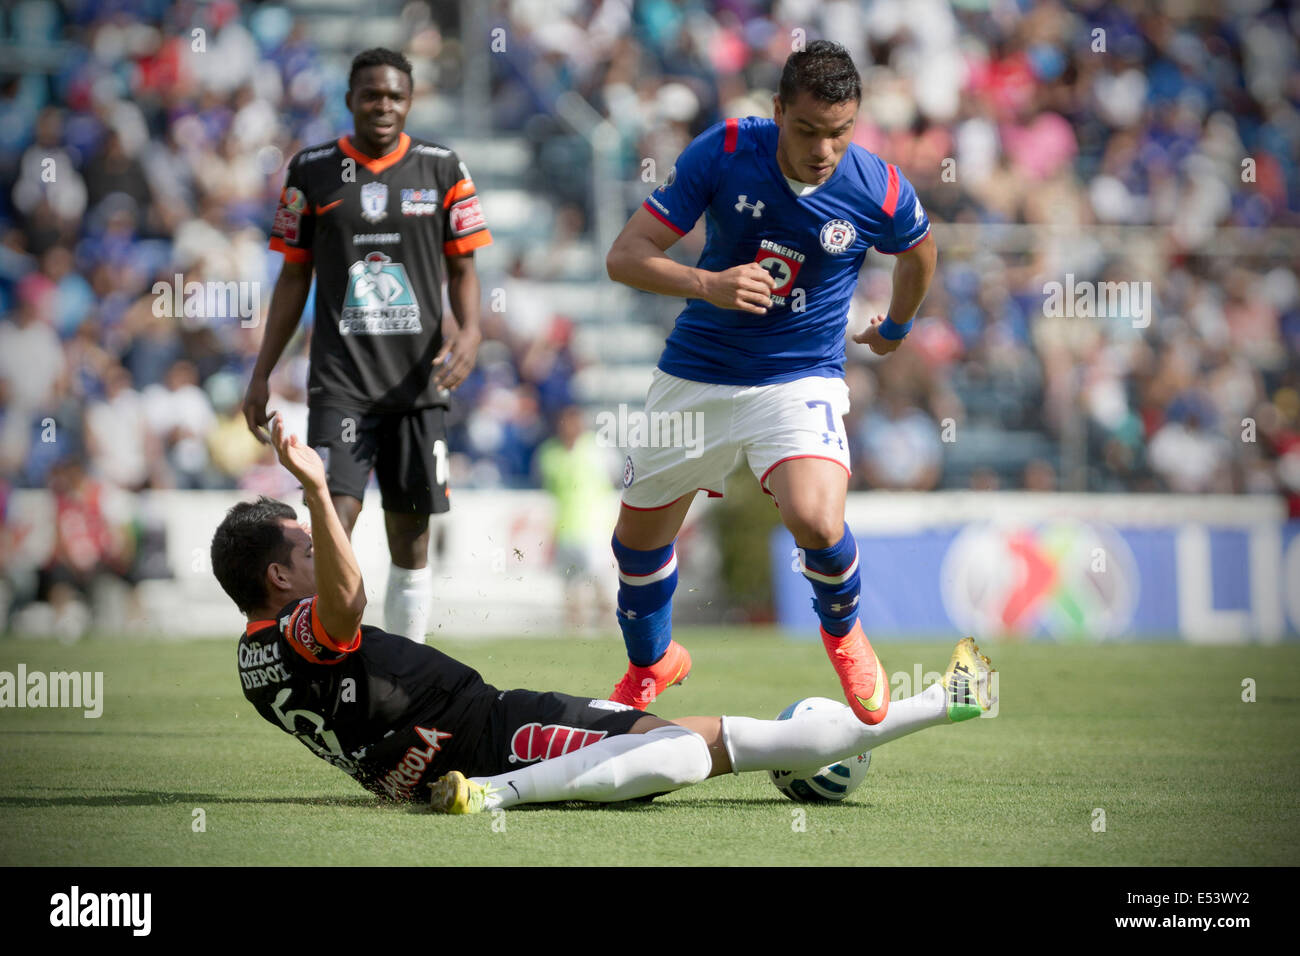 Mexico City, Mexico. 19th July, 2014. Cruz Azul's Pablo Barrera (R) vies for the ball with Pachuca's Daniel Arreola during their match of the MX League Opening Tournament held at Azul Stadium in Mexico City, capital of Mexico, on July 19, 2014. Credit:  Alejandro Ayala/Xinhua/Alamy Live News Stock Photo